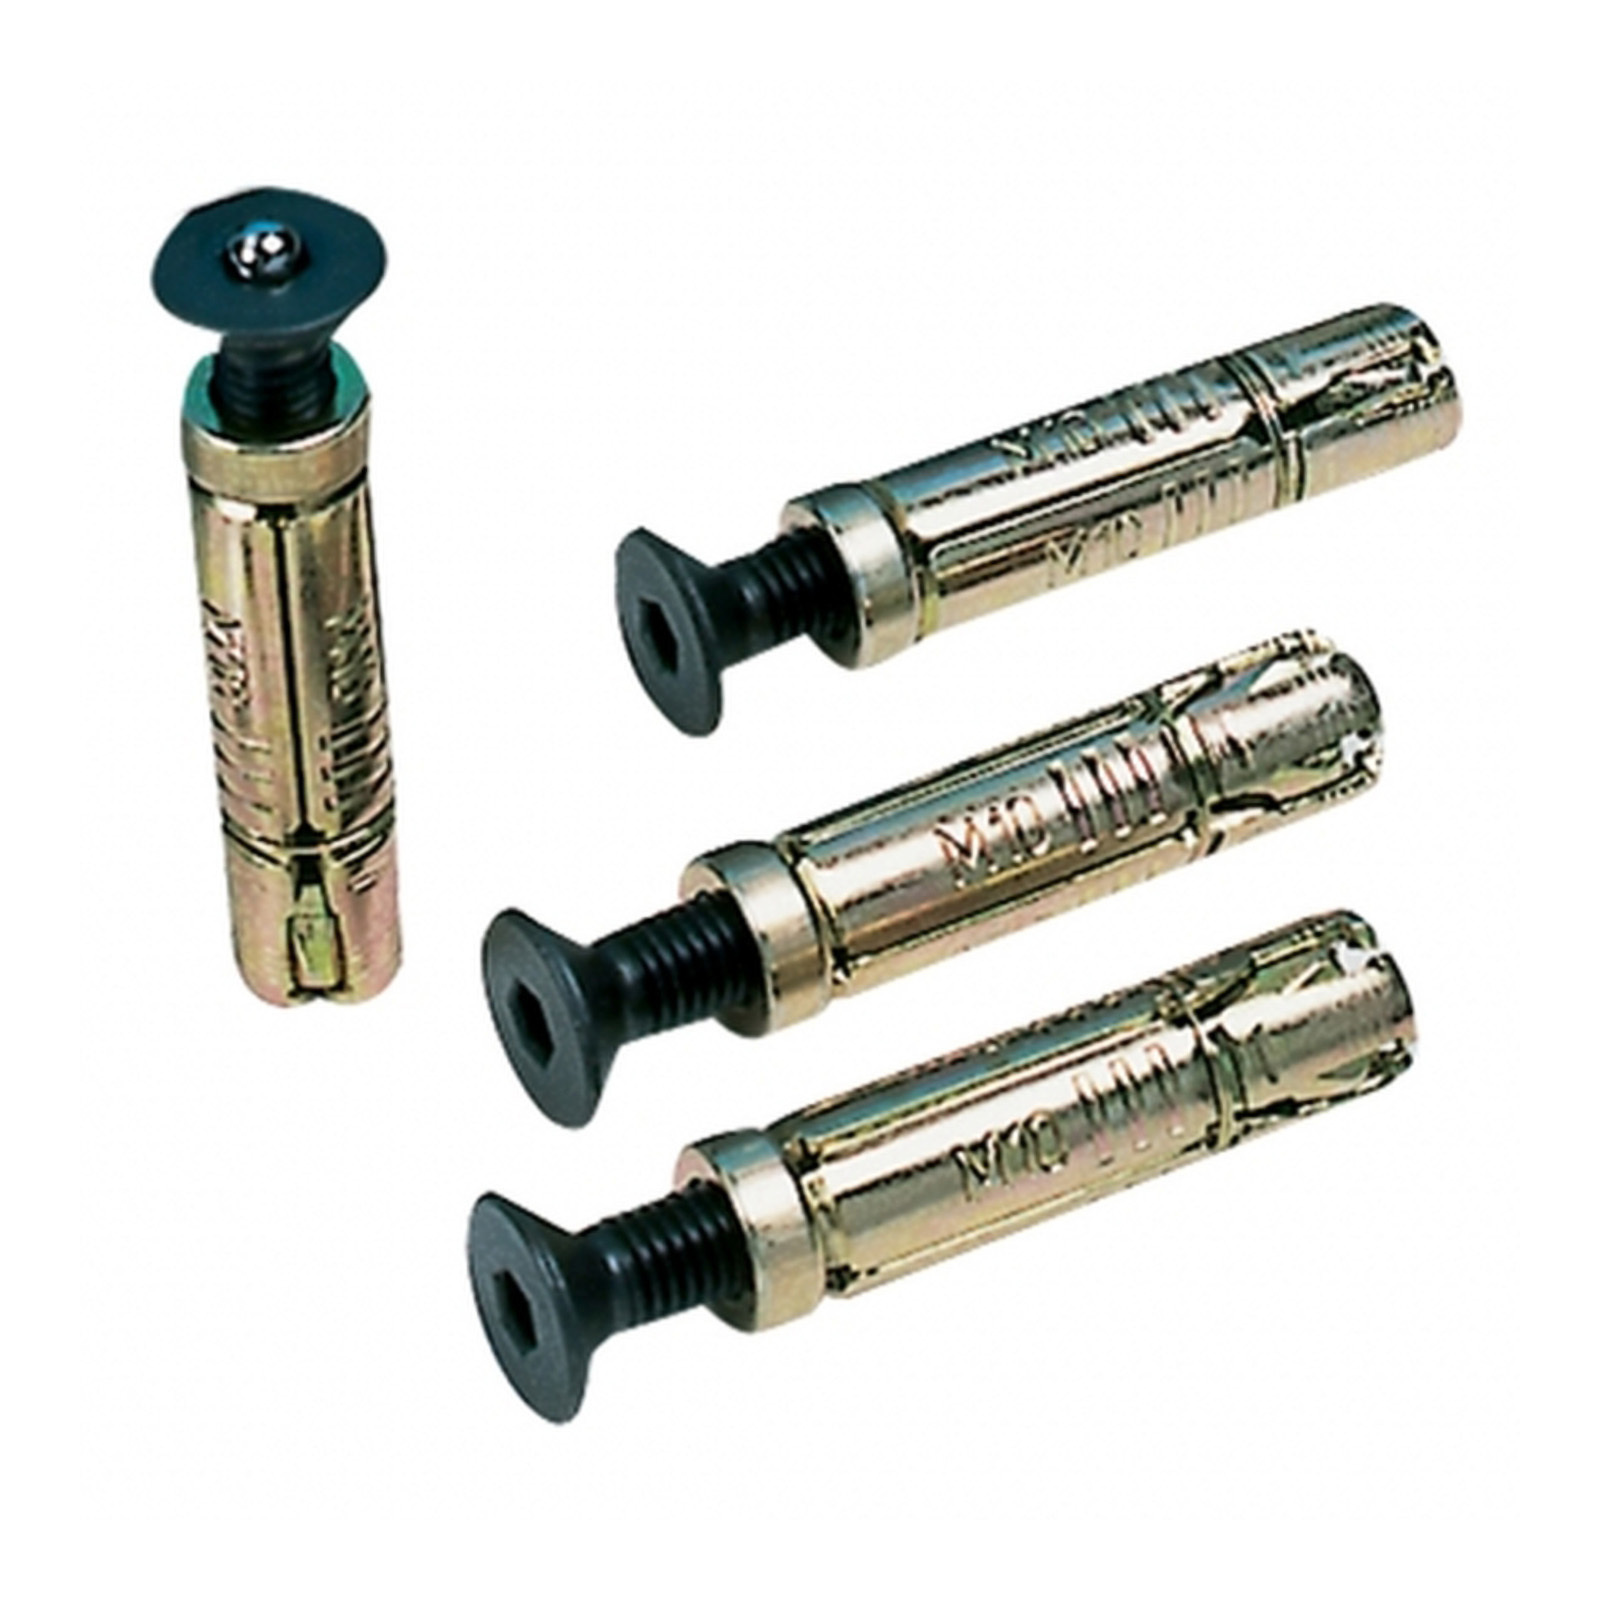 Oxford Ground Anchor Replacement Bolts - RotaForce (4 Pack)